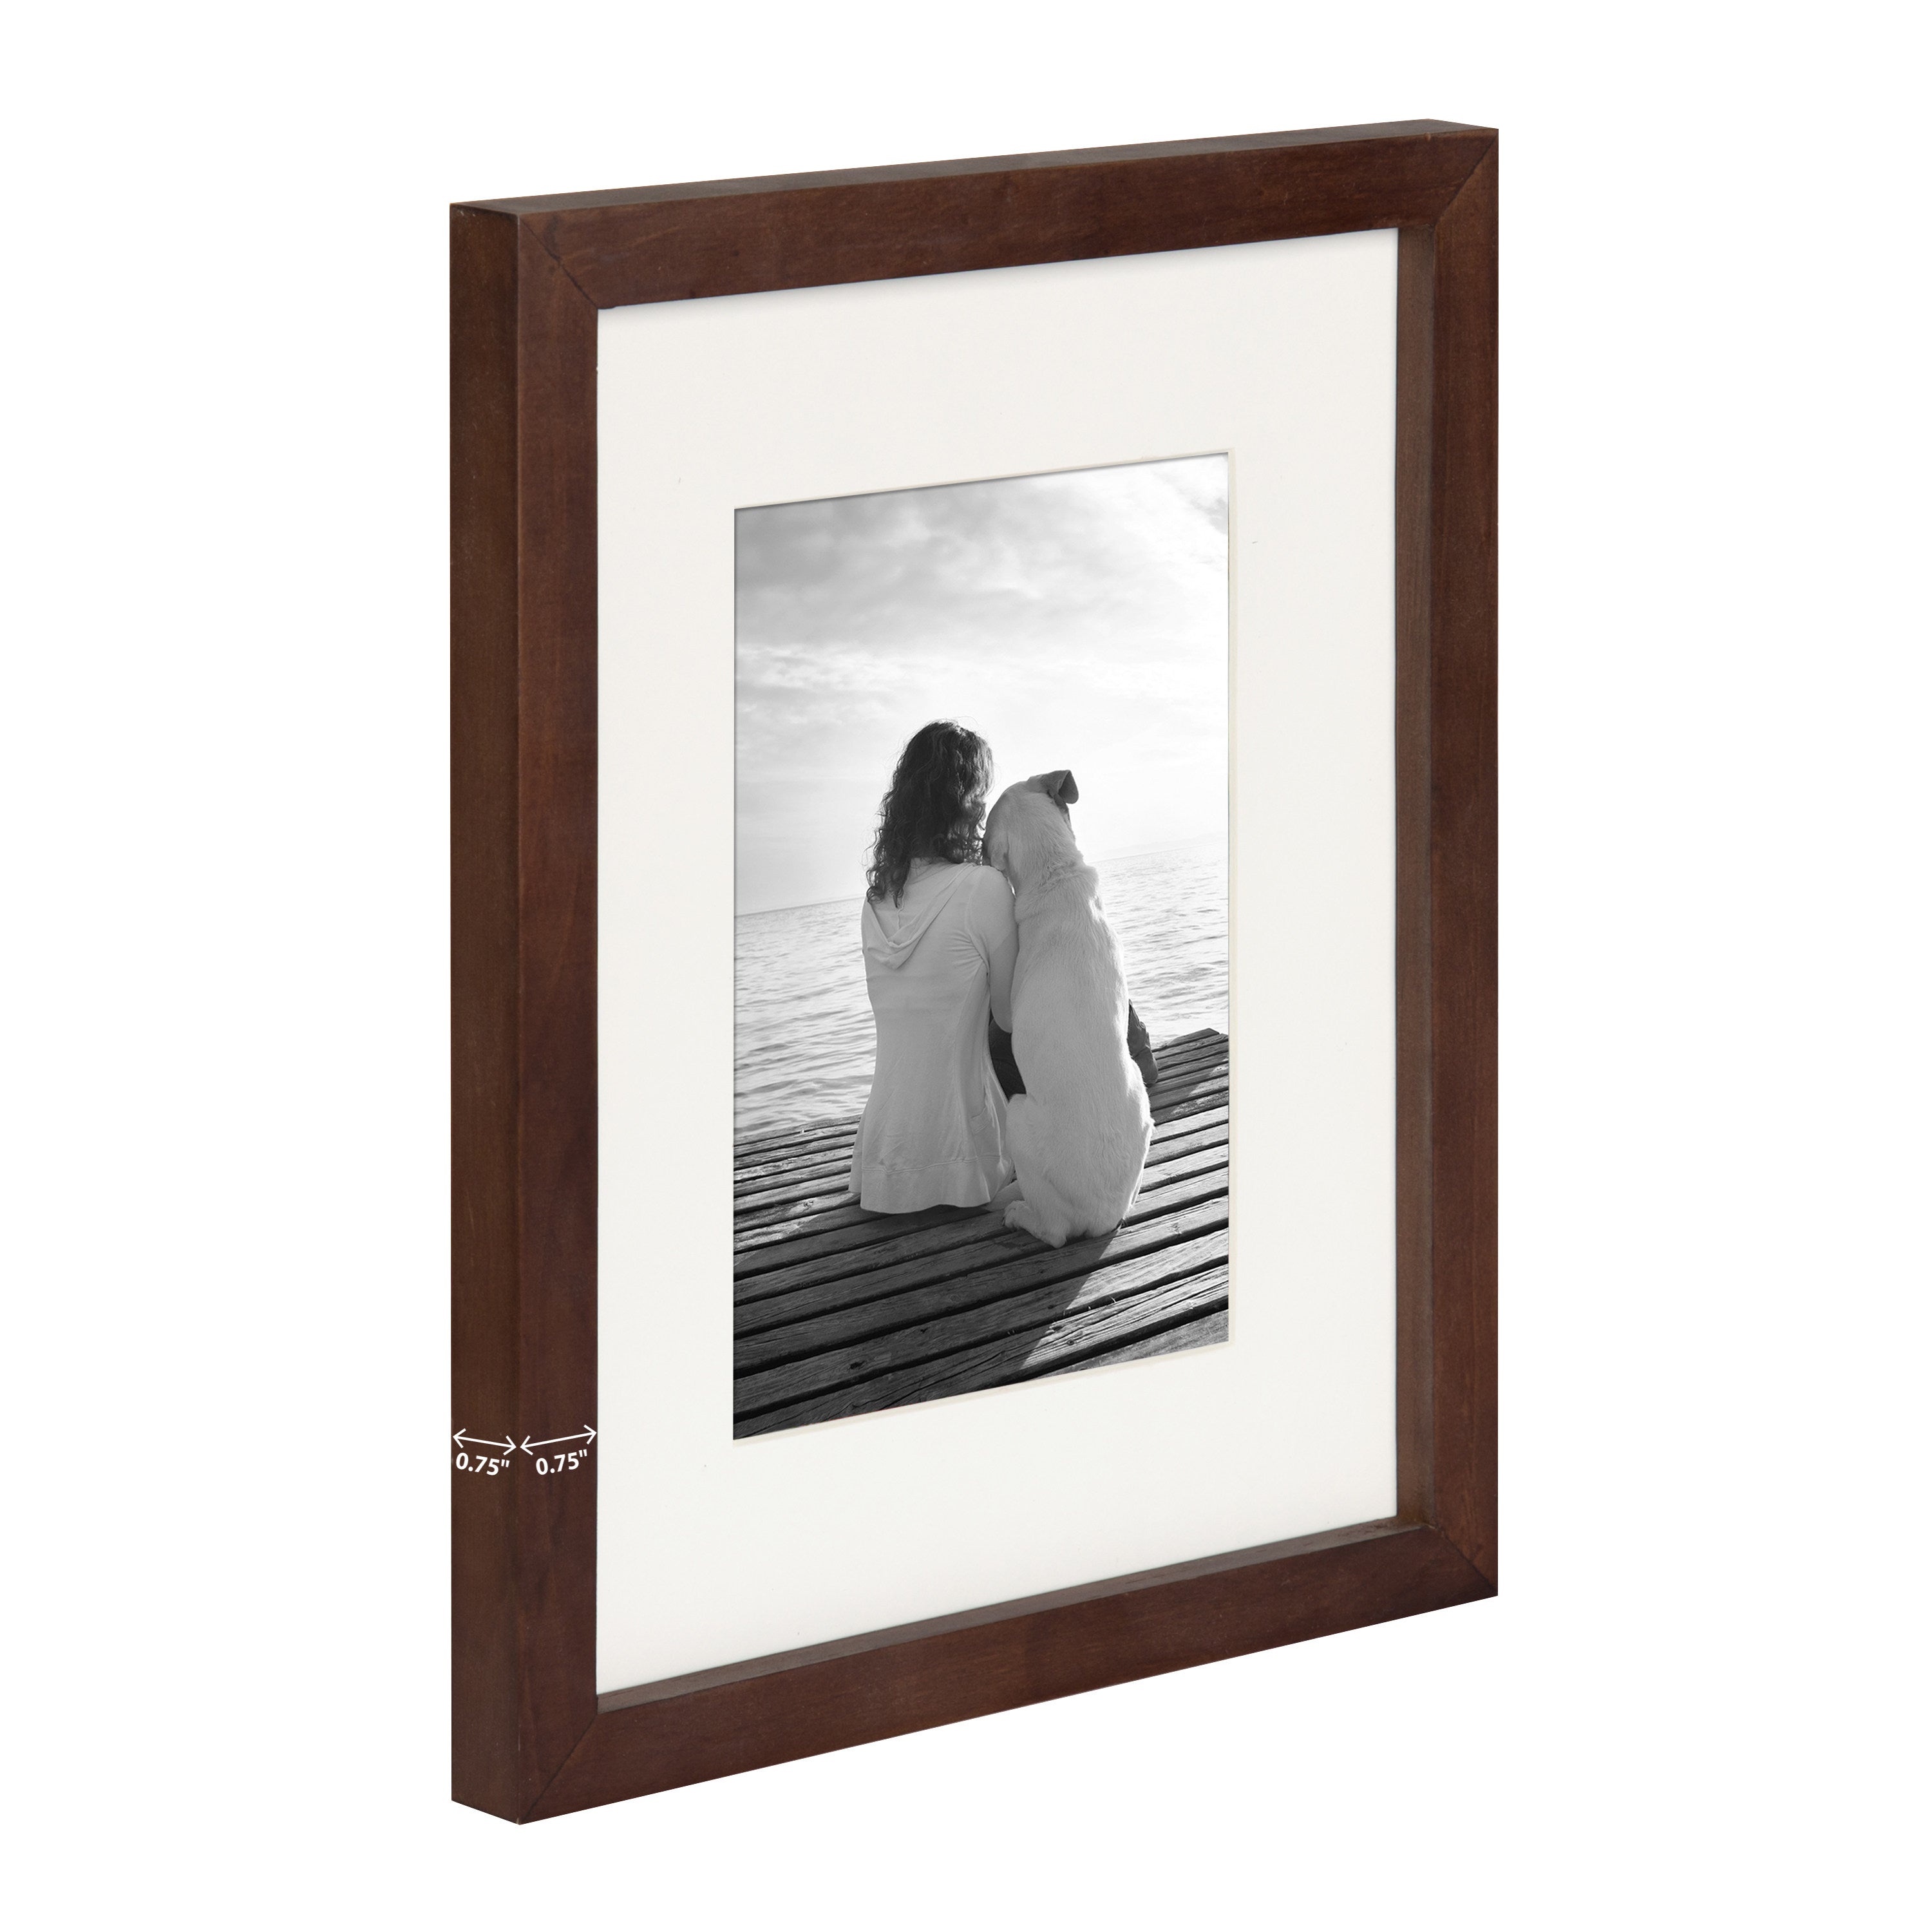 DesignOvation Gallery Wood Photo Frame Set for Customizable Wall Display,  Rustic Brown 16x20 matted to 8x10, Pack of 2 